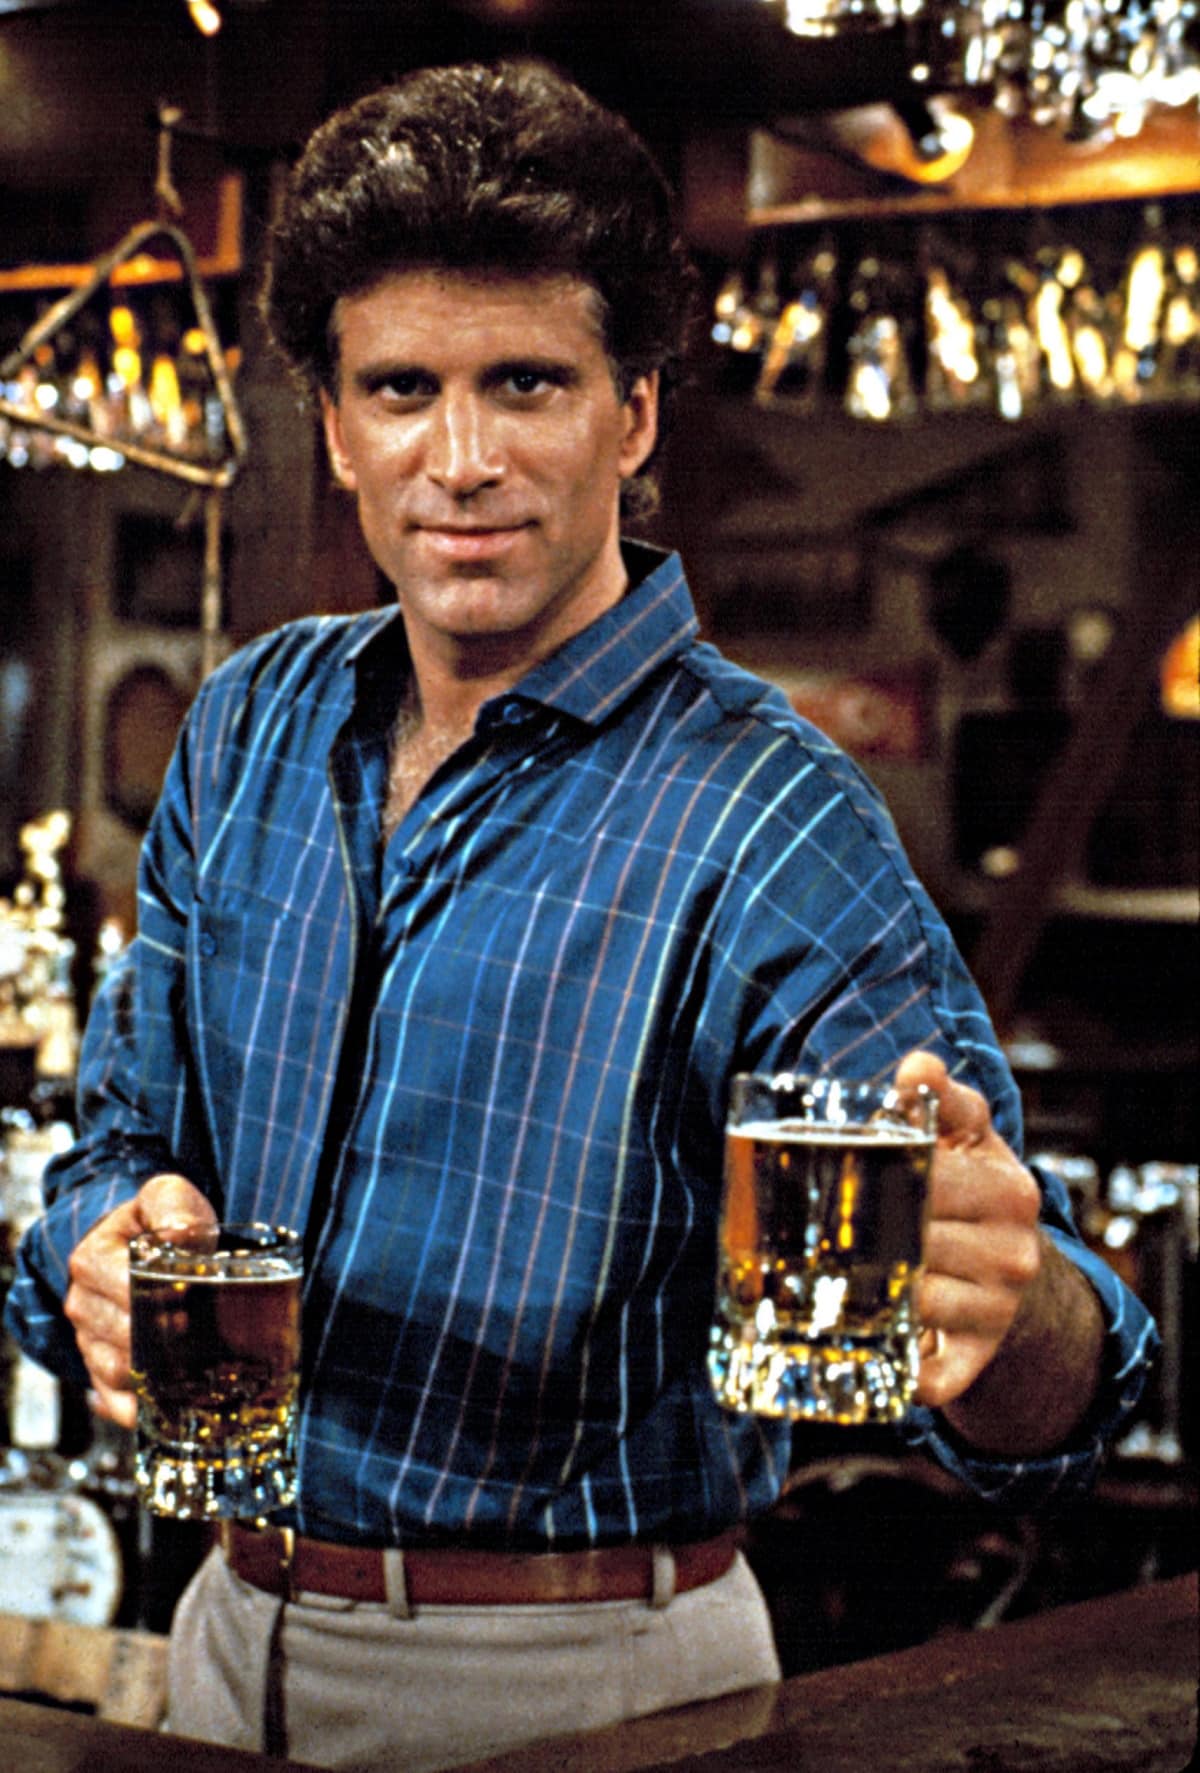 Ted Danson as Sam Malone in the popular sitcom television series Cheers